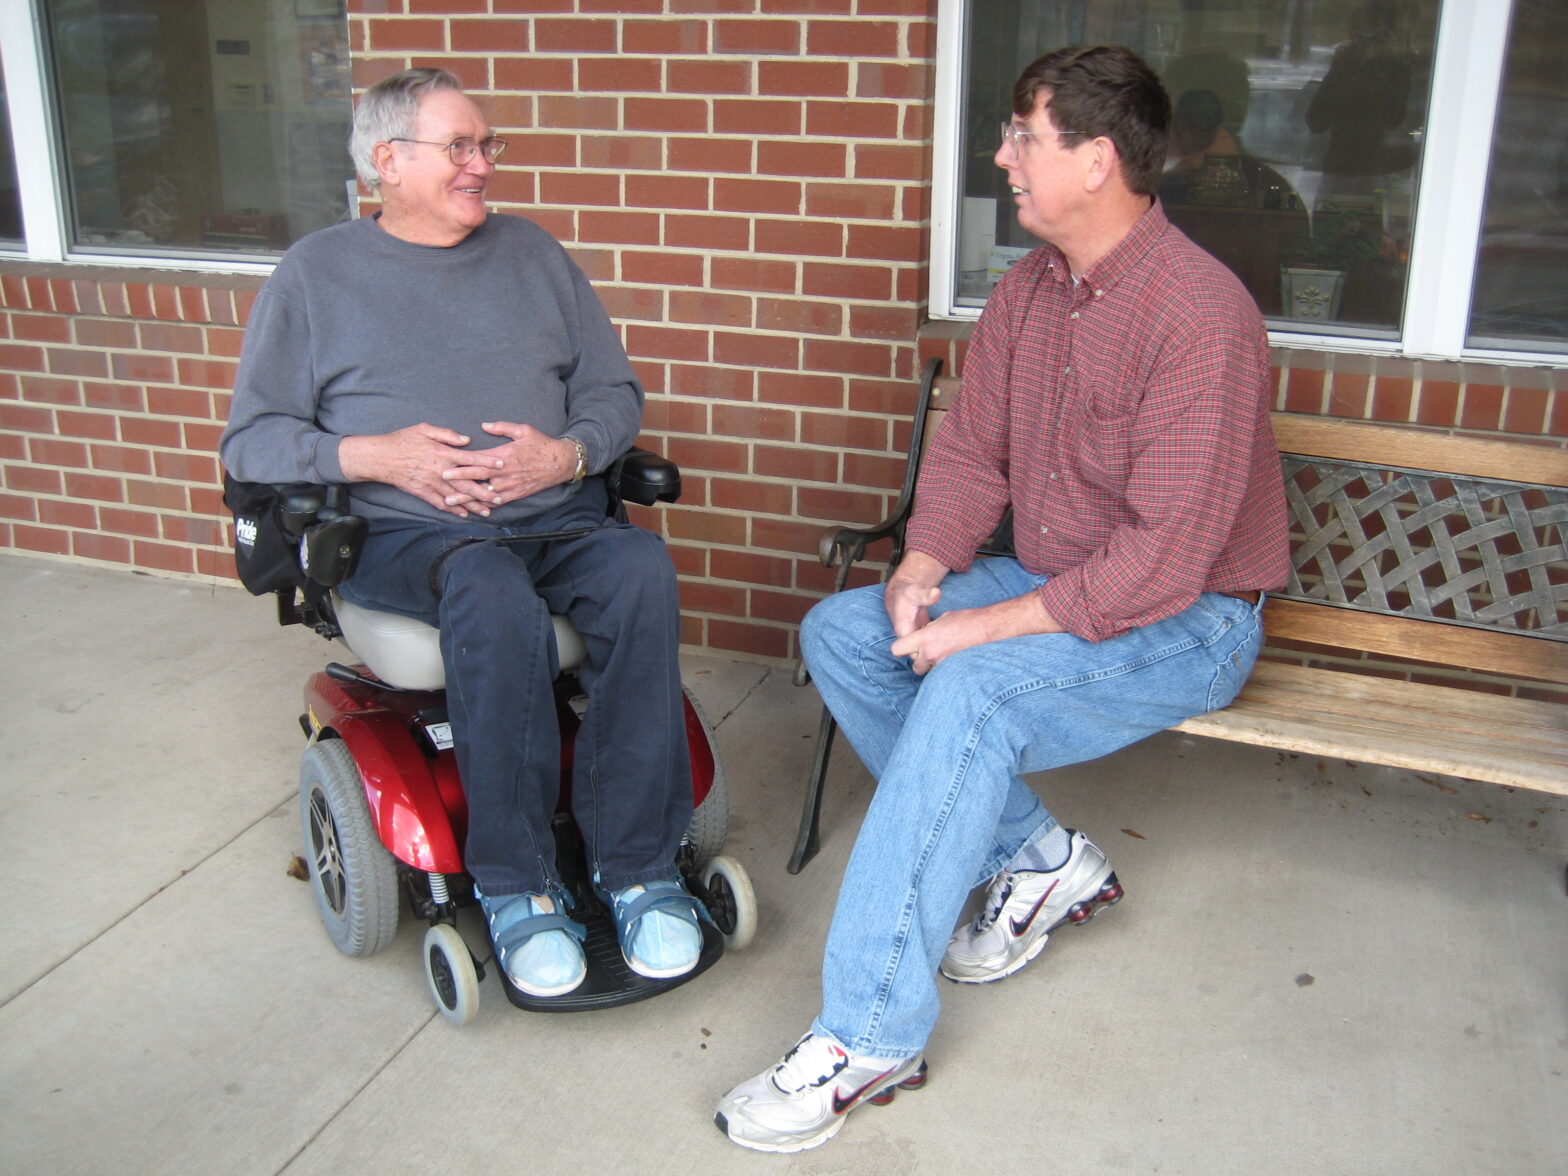 IRC director Tom Vandever and former Board of Directors member and advocate Harry Bowen chat in front of the IRC office